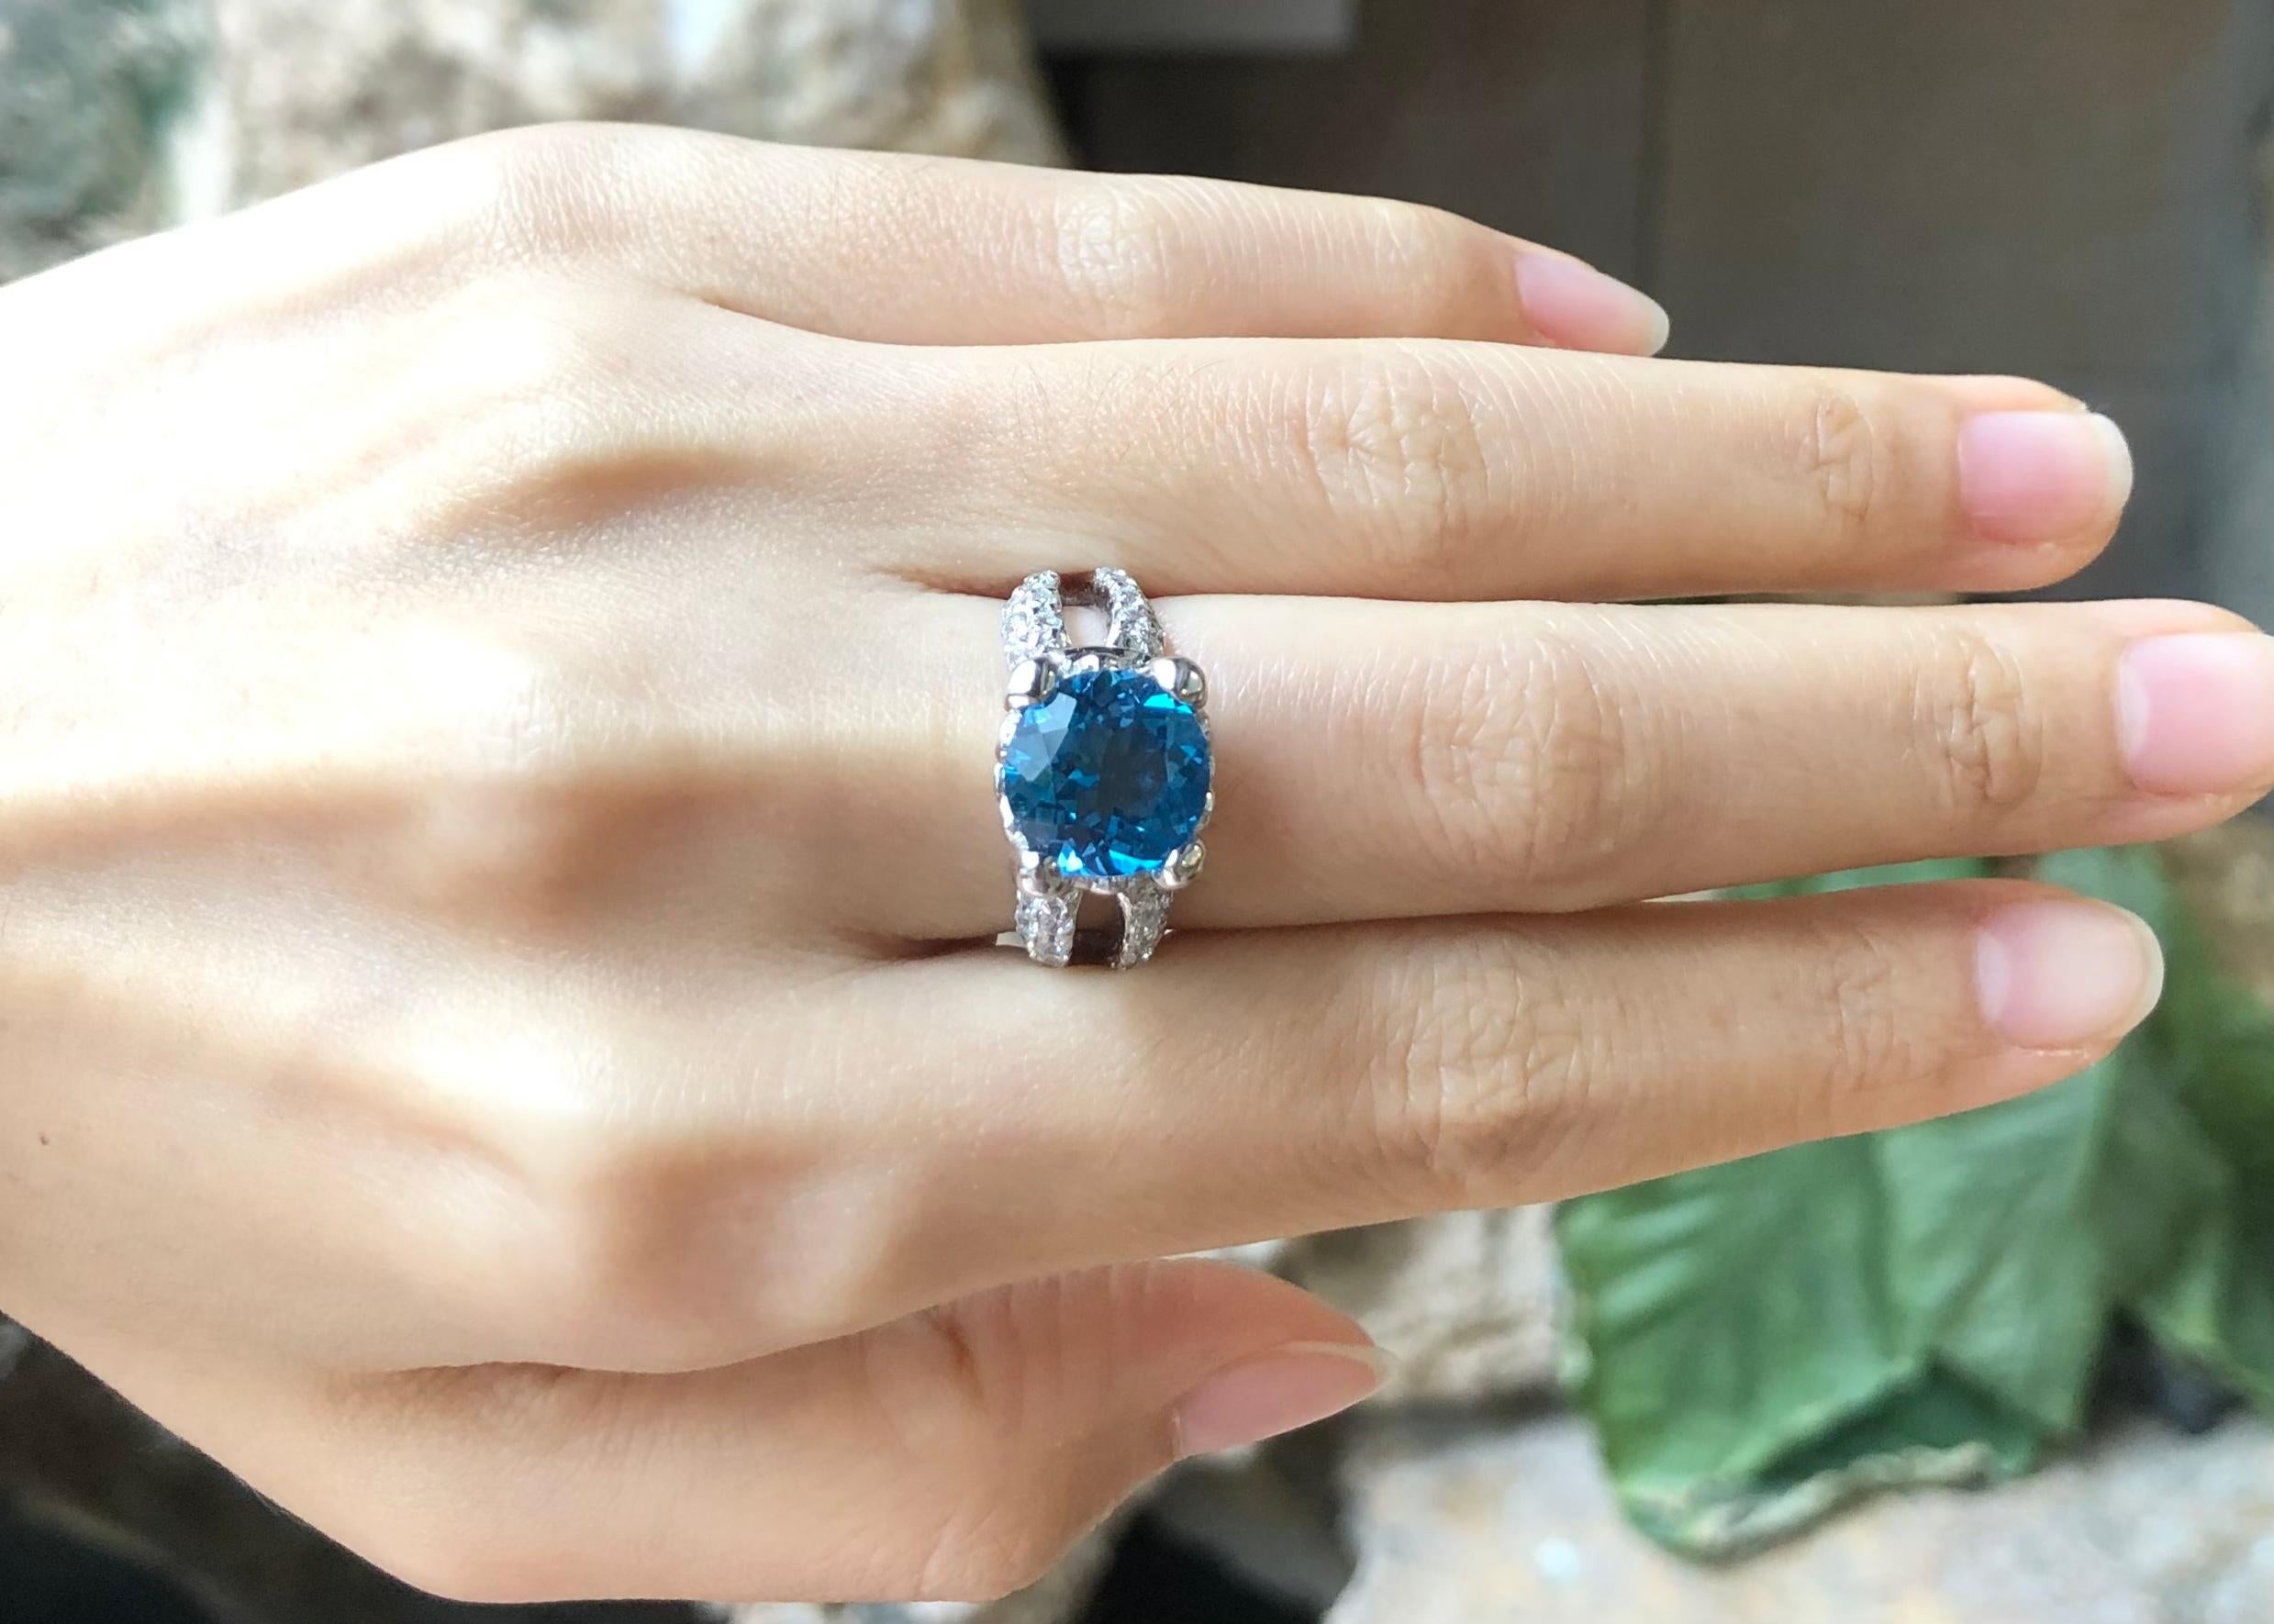 Blue Topaz with Cubic Zirconia Ring set in Silver Settings

Width:  1.2 cm 
Length: 1.1 cm
Ring Size: 55
Total Weight: 6.94 grams

*Please note that the silver setting is plated with rhodium to promote shine and help prevent oxidation.  However,